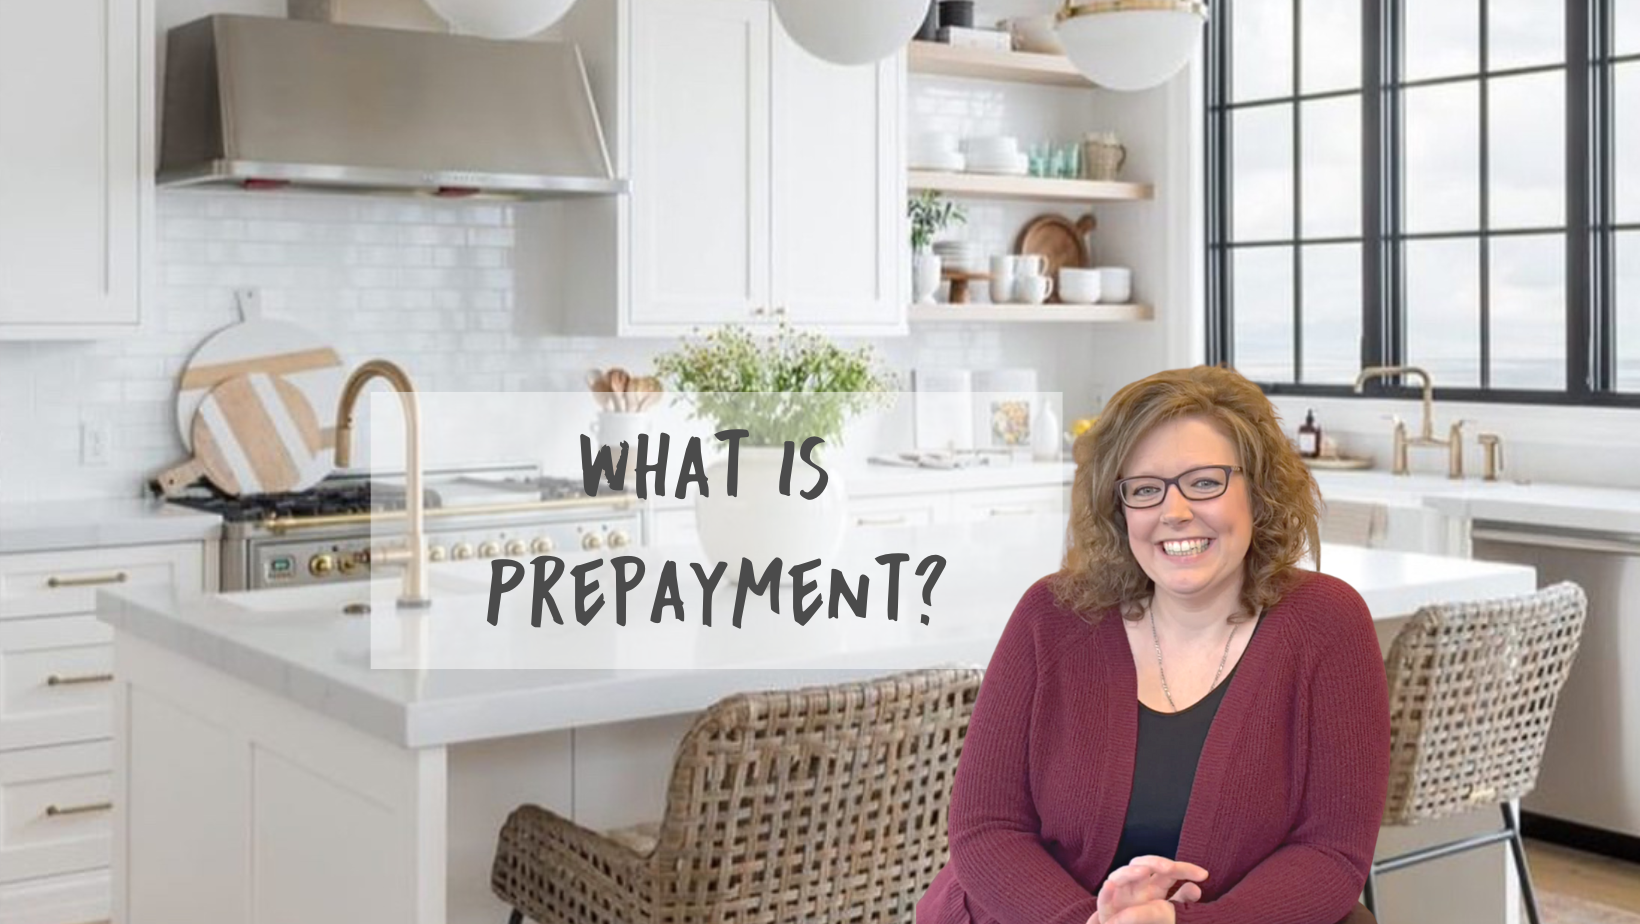 Video Tutorial with Val explaining Prepayment